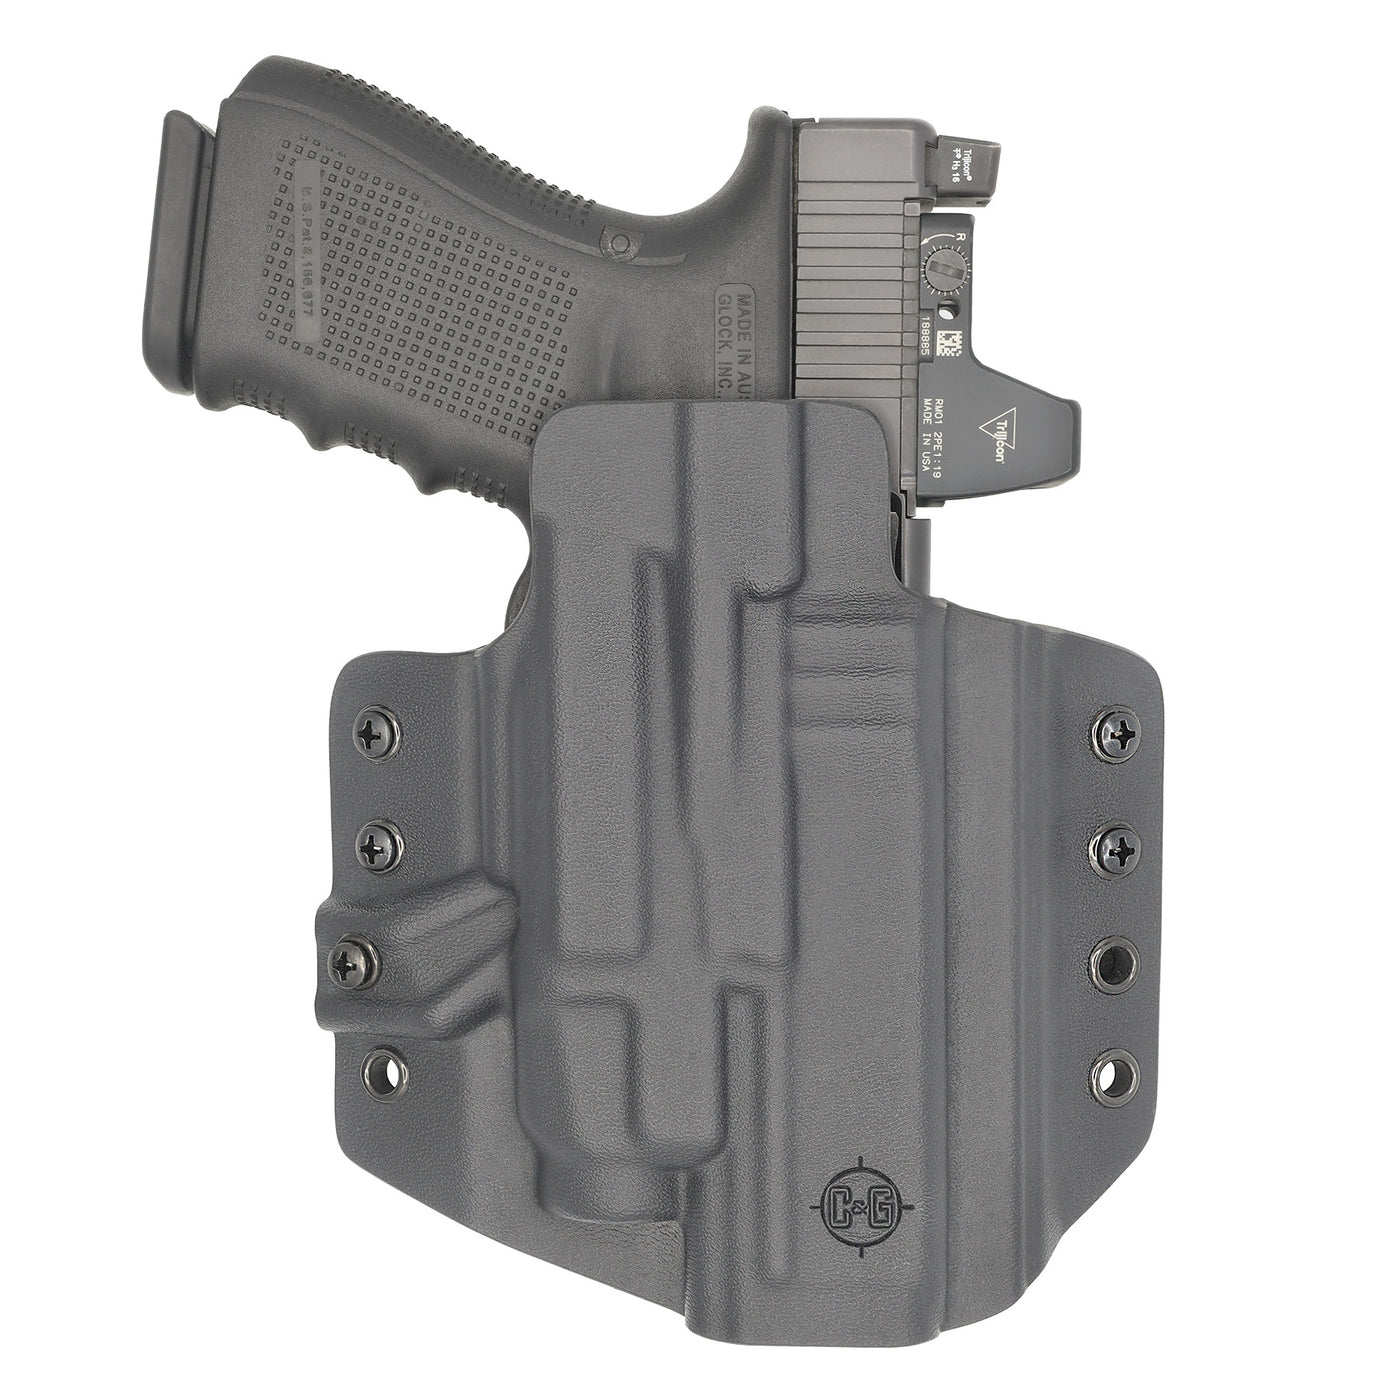 C&G Holsters custom OWB Tactical Shadow Systems Streamlight TLR7 holstered